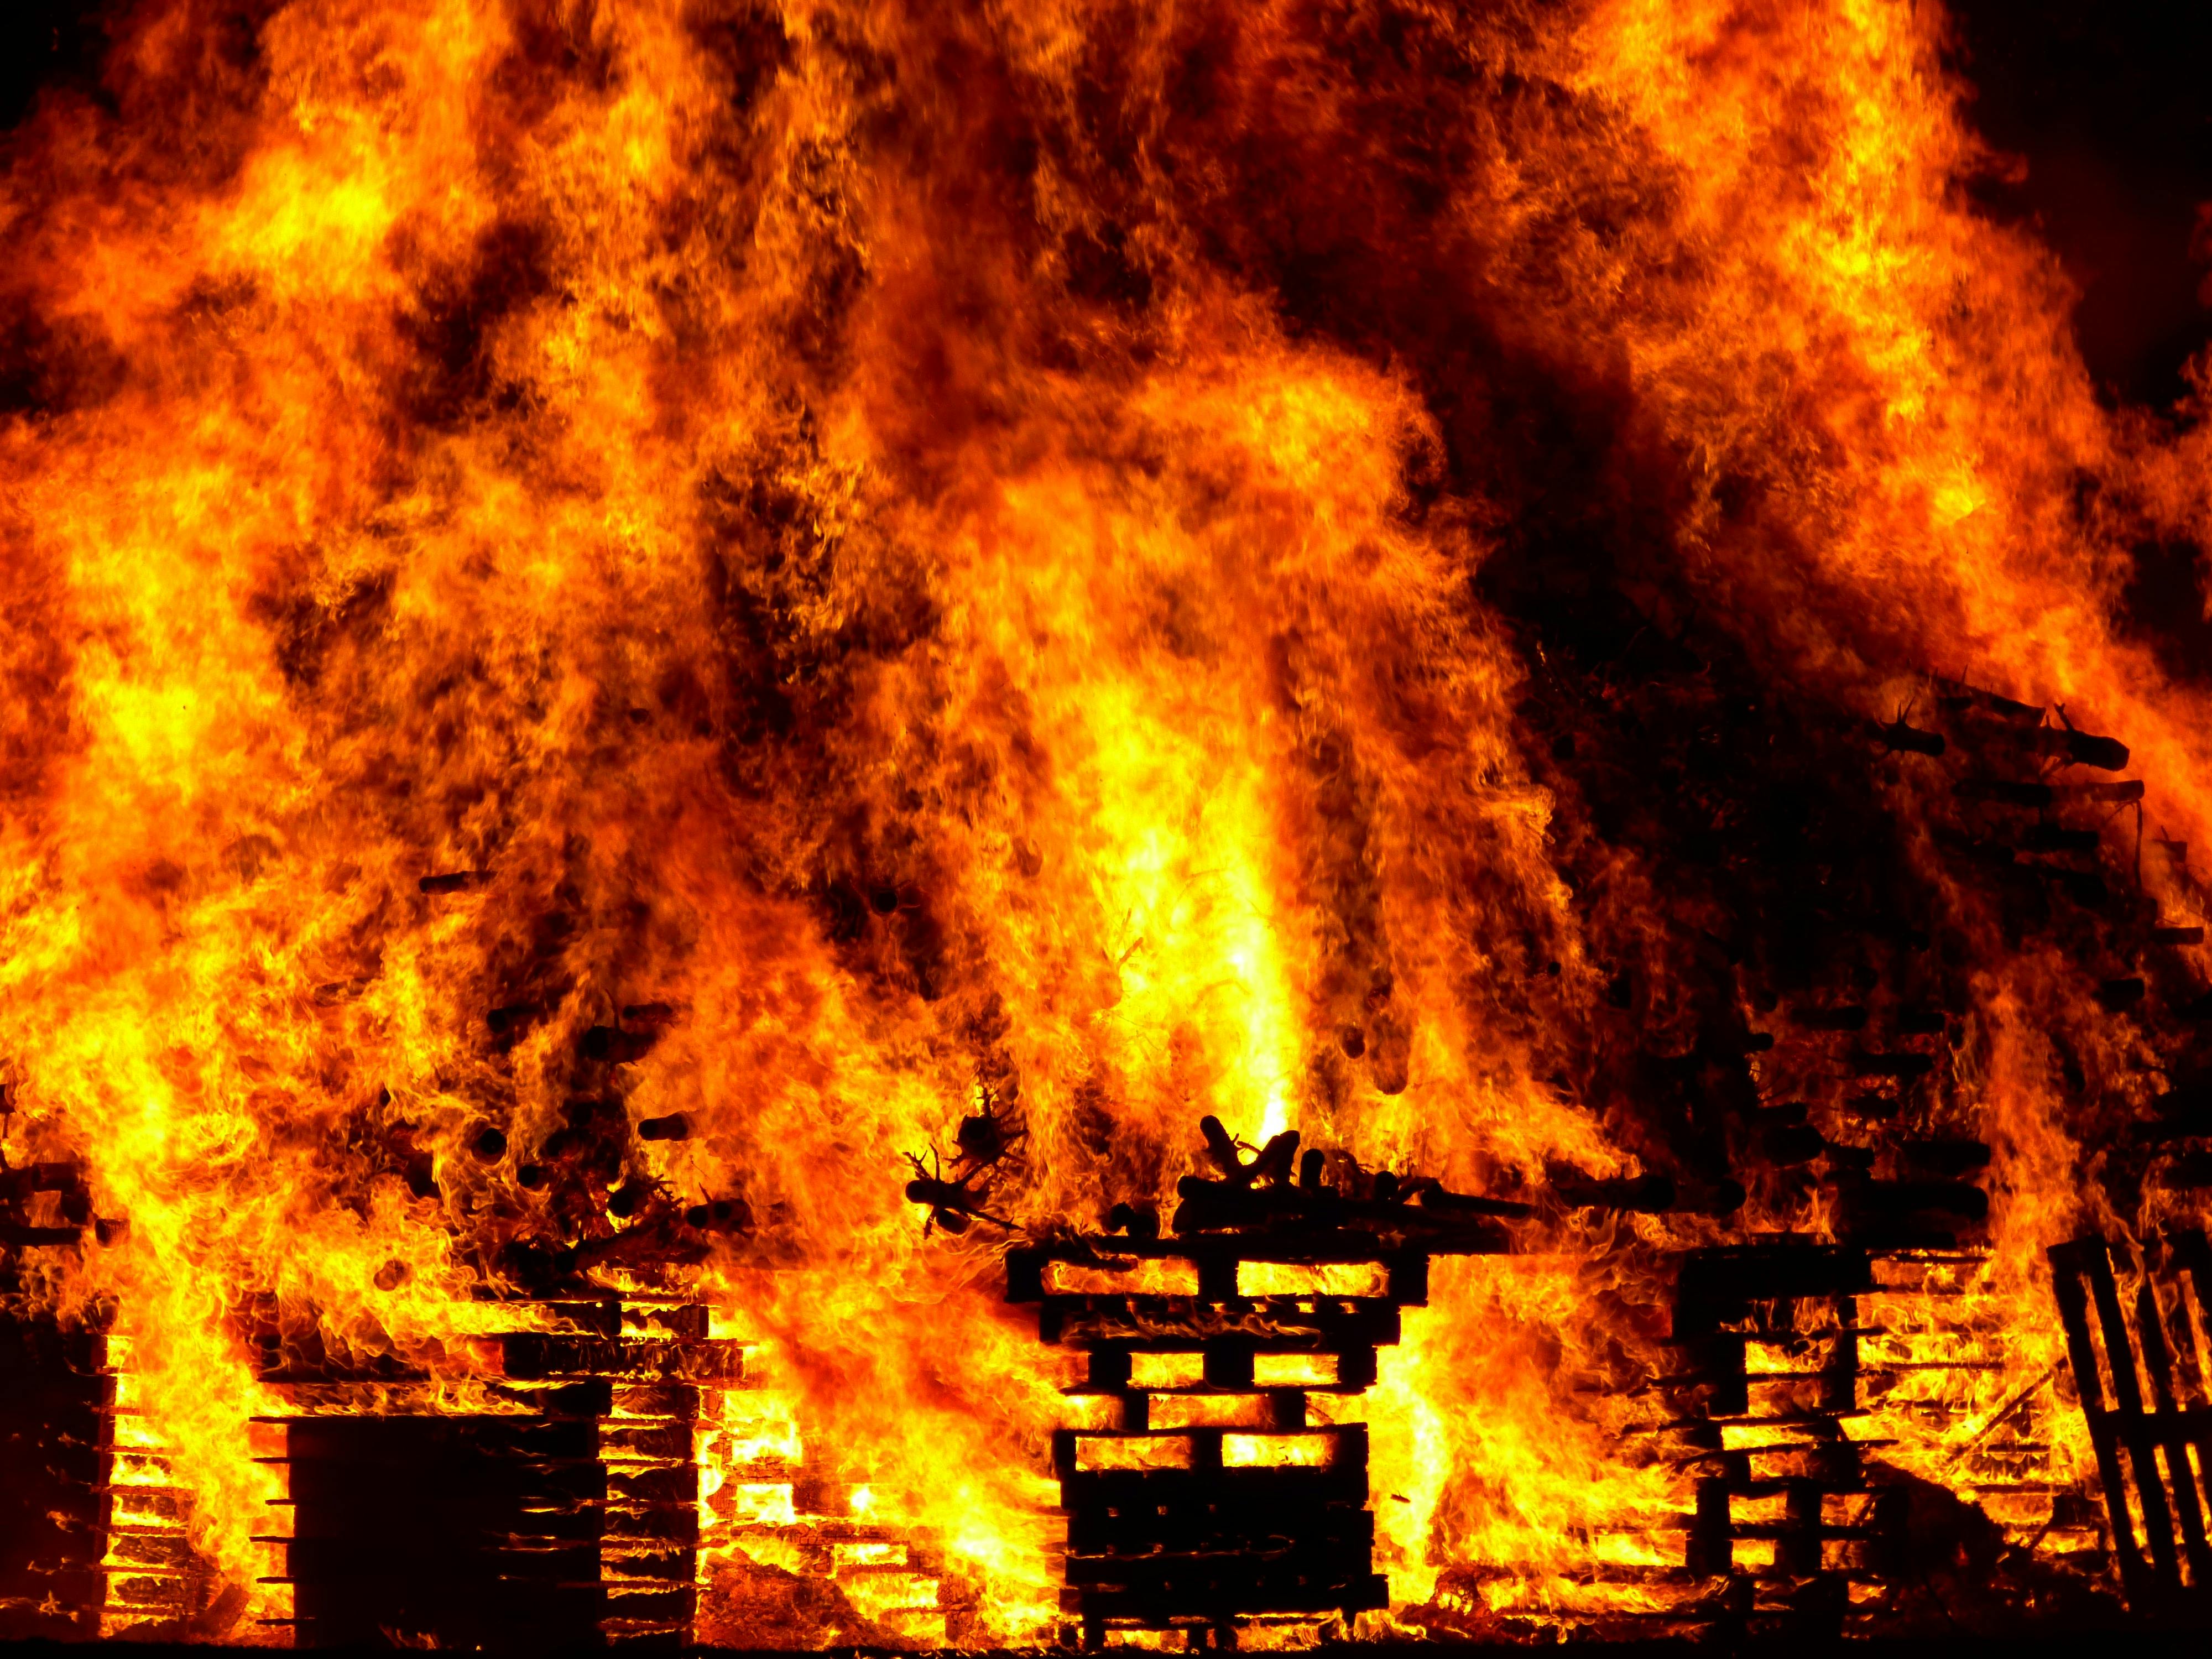 A house engulfed in flames. For illustration purposes only | Source Pexels